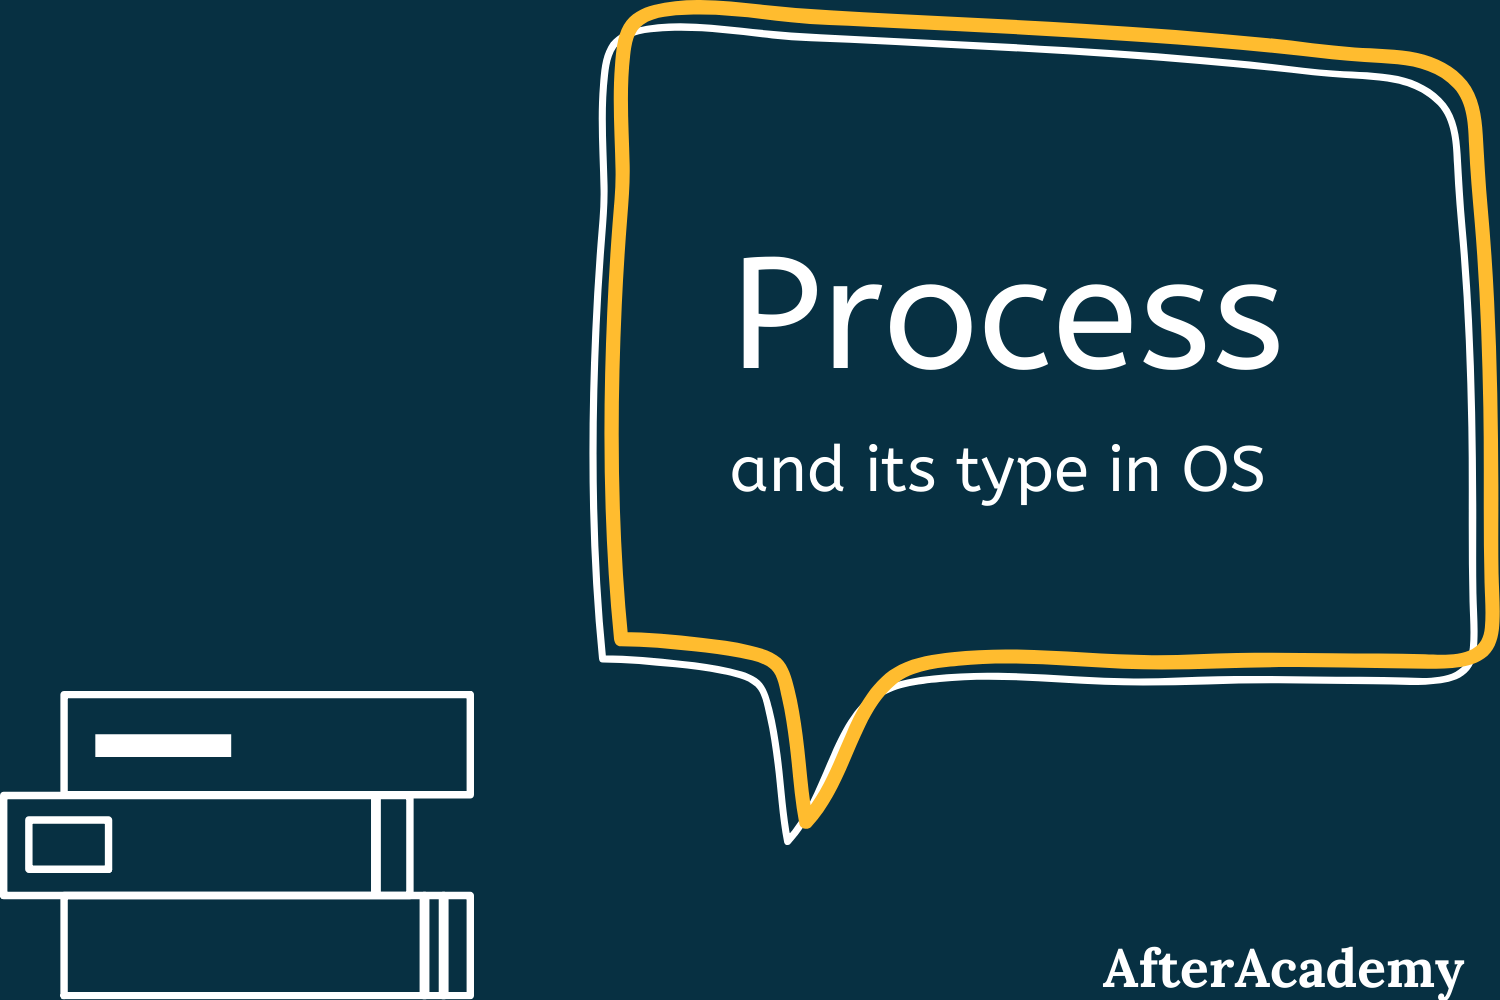 What is a Process in Operating System and what are the different states of a Process?